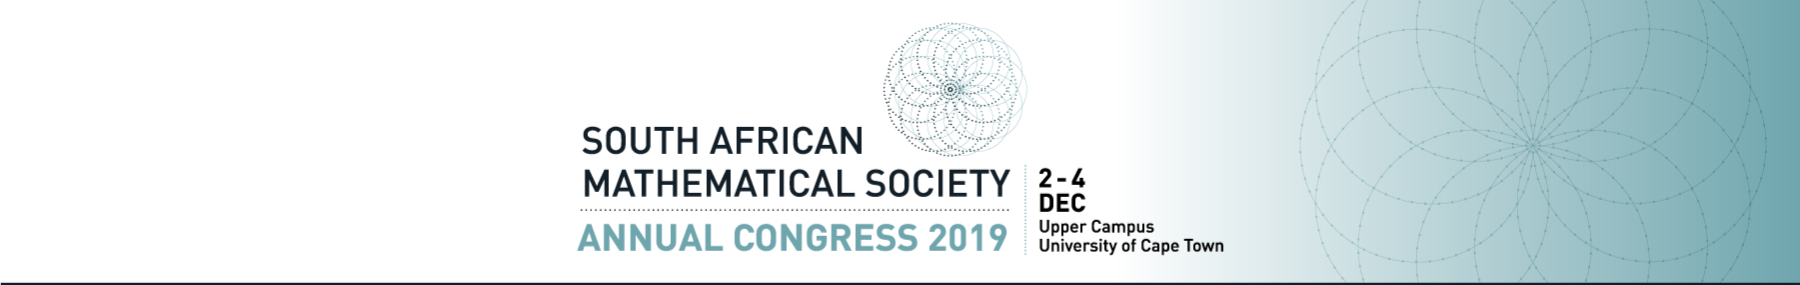 South African Mathematical Society Congress